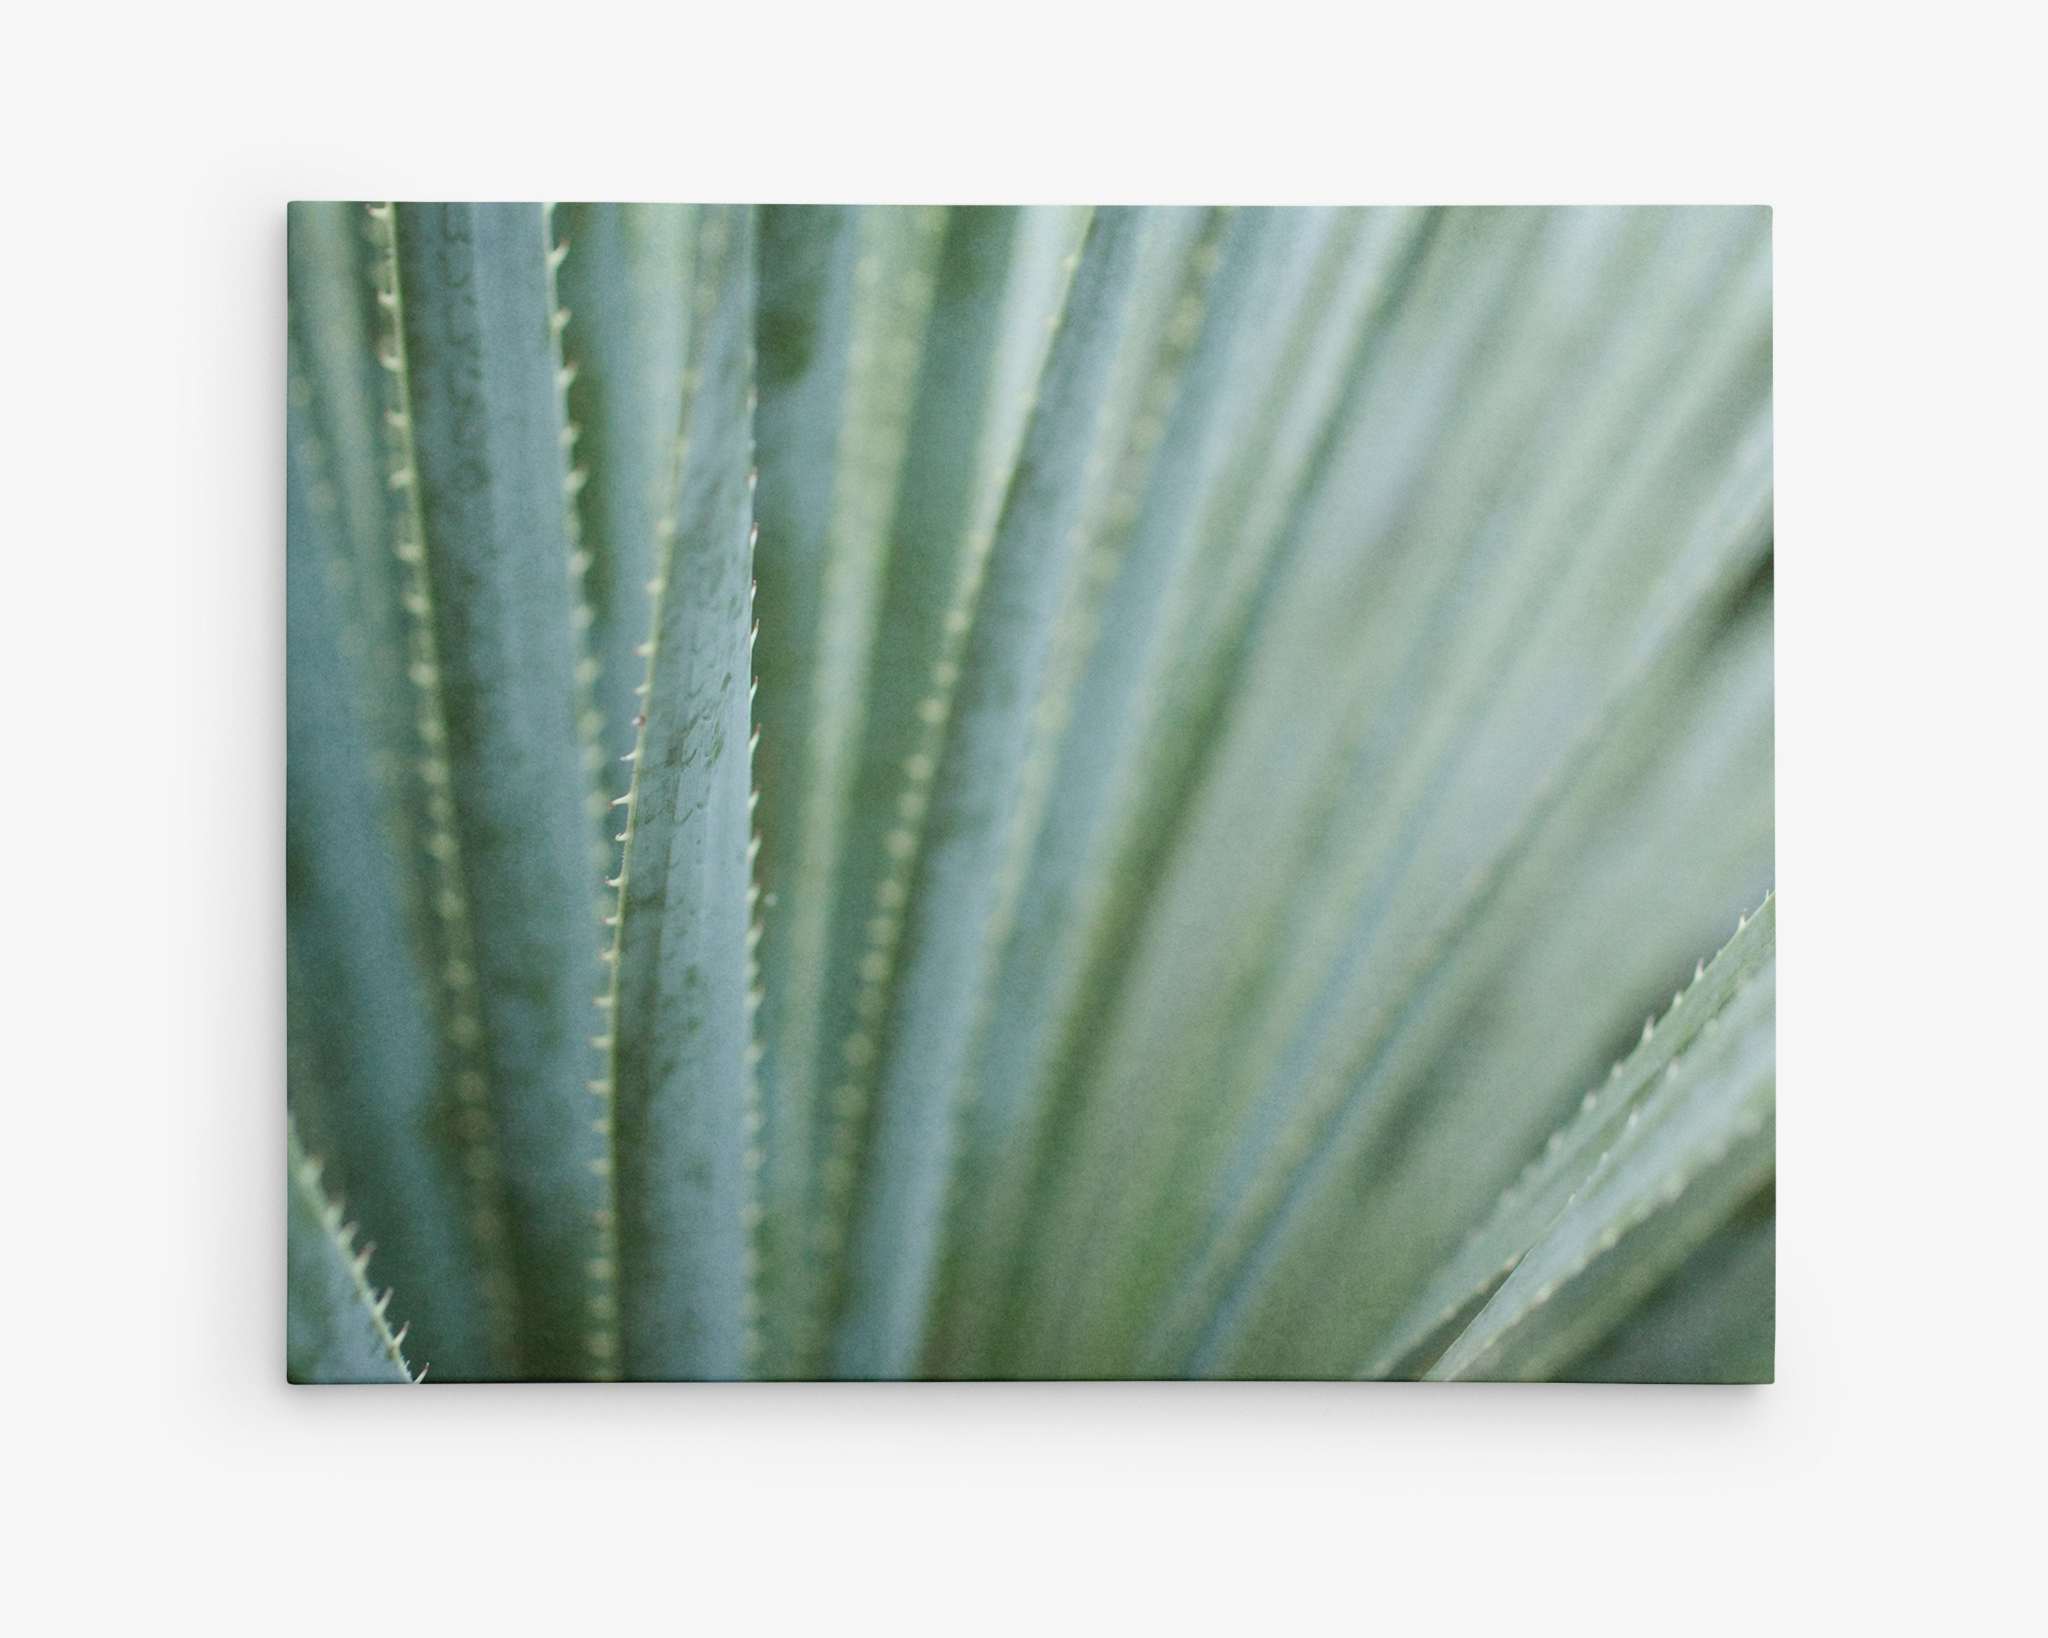 A close-up image of succulent plant leaves. The leaves are pointed and arranged in a radial pattern, with a light green color and subtle texture visible. Like desert plants, their resilience shines through. The background gradually blurs, emphasizing the sharpness of the leaves in the foreground. This is captured beautifully in Offley Green&#39;s Abstract Green Botanical Canvas Wall Art, &#39;Strands and Spikes&#39;.